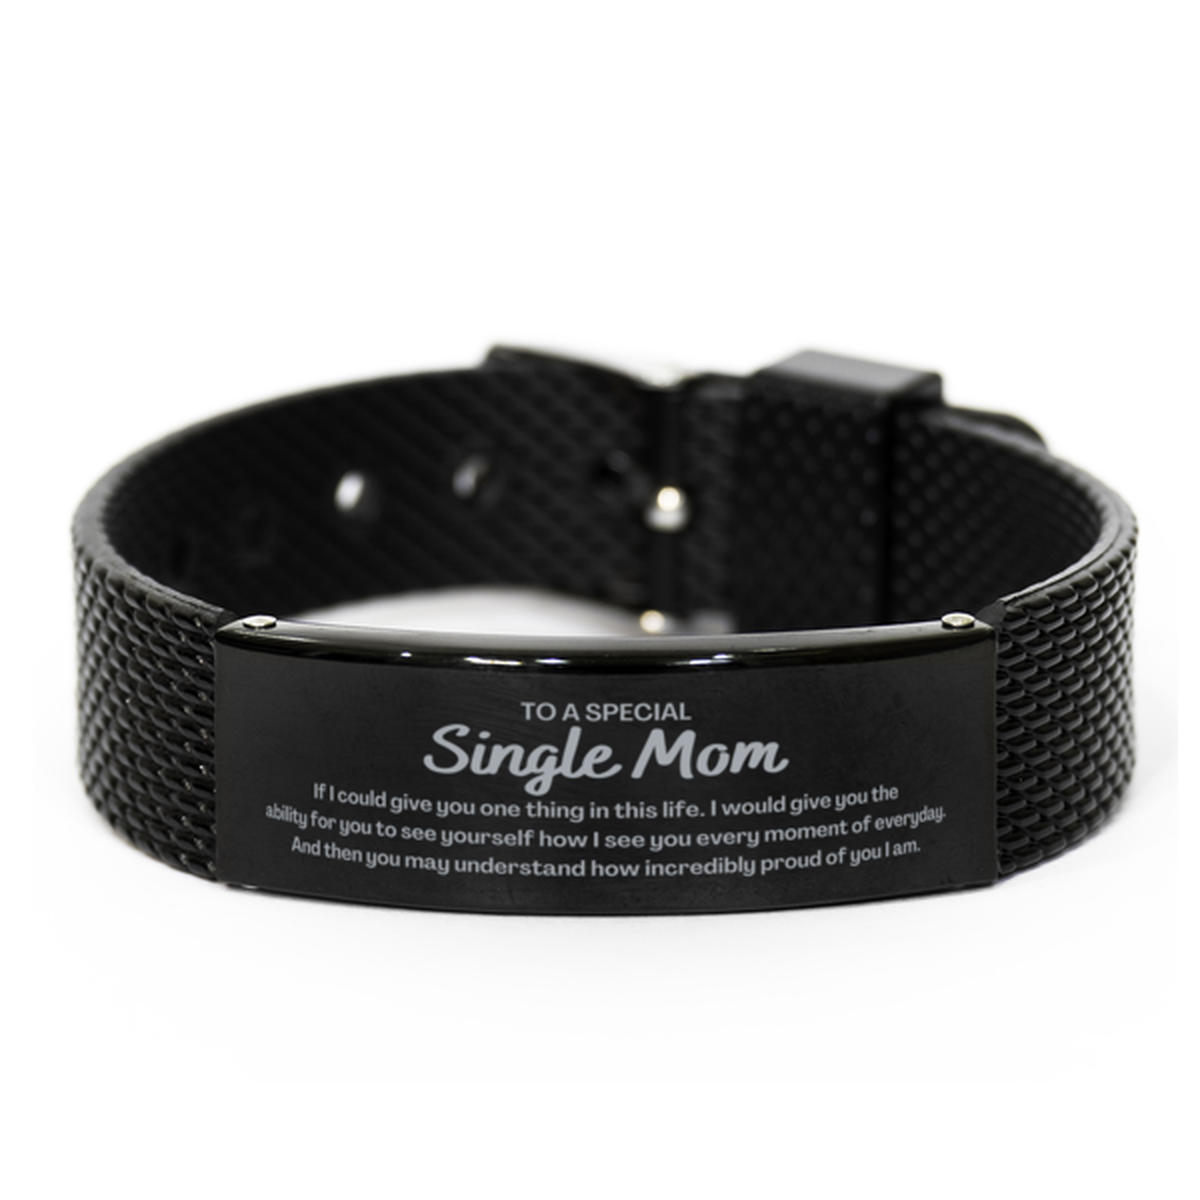 To My Single Mom Black Shark Mesh Bracelet, Gifts For Single Mom Engraved, Inspirational Gifts for Christmas Birthday, Epic Gifts for Single Mom To A Special Single Mom how incredibly proud of you I am